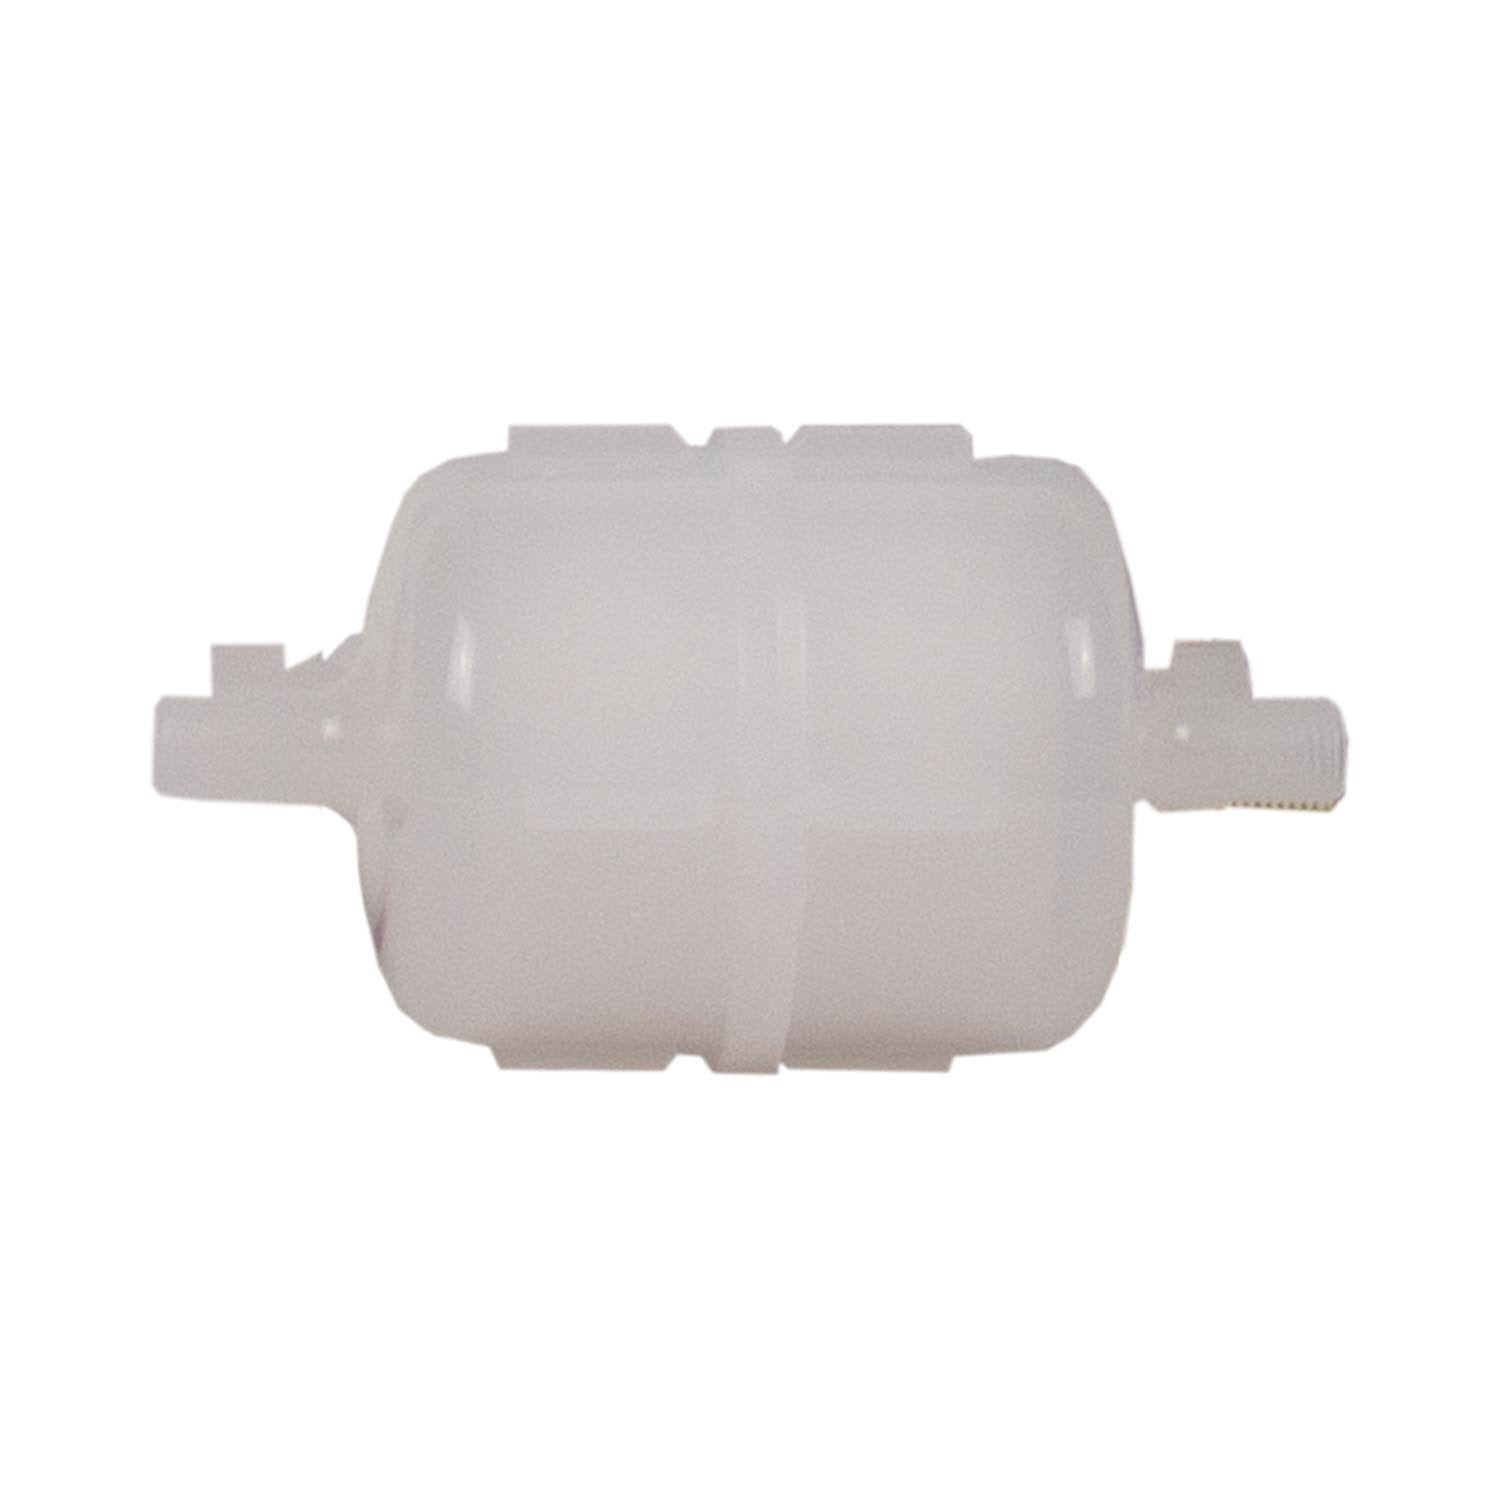 Capsule Ultrafiltration (UF) Water Filter Membrane - Water Filter Cartridges - Crystal Quest